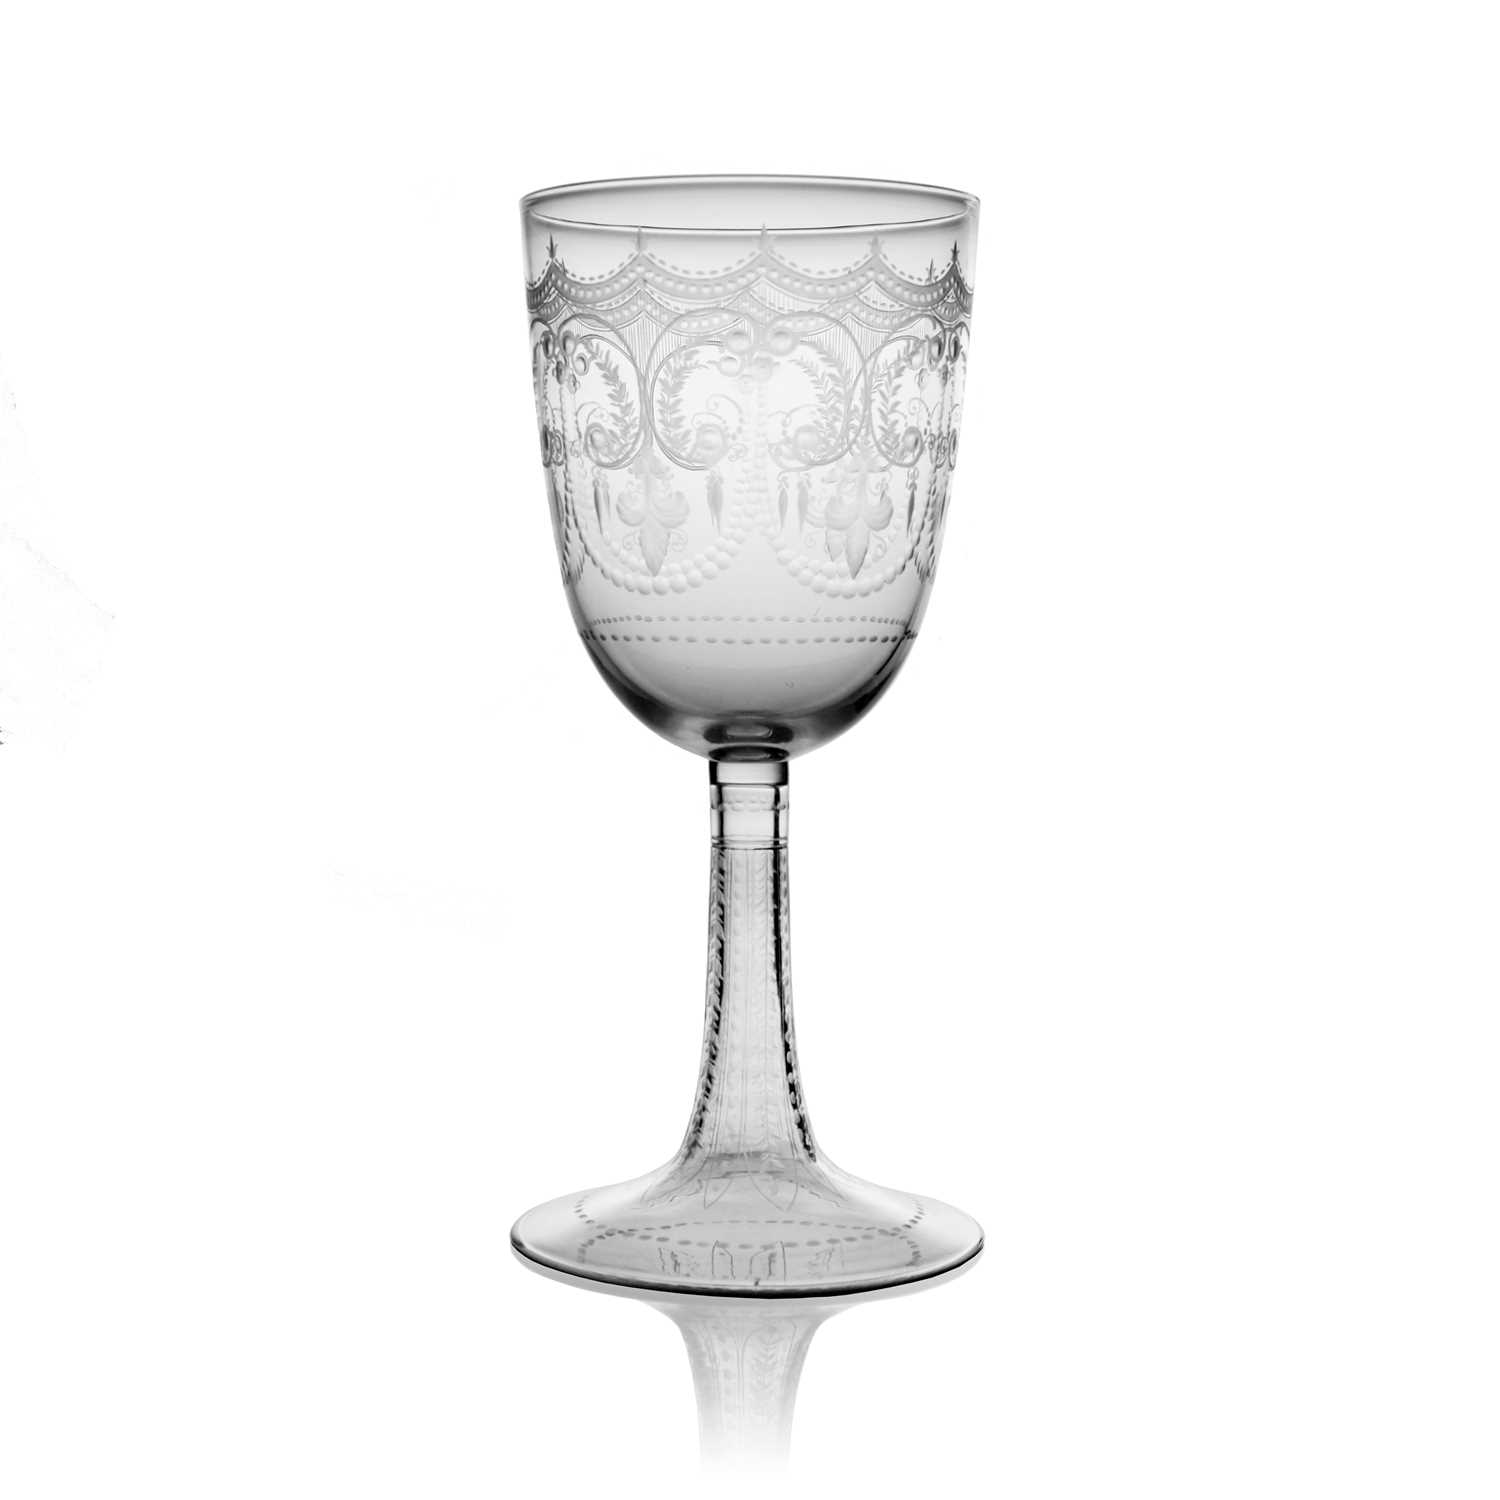 A Stourbridge engraved glass wine goblet, circa 1880, the large rounded bowl decorated with festoons